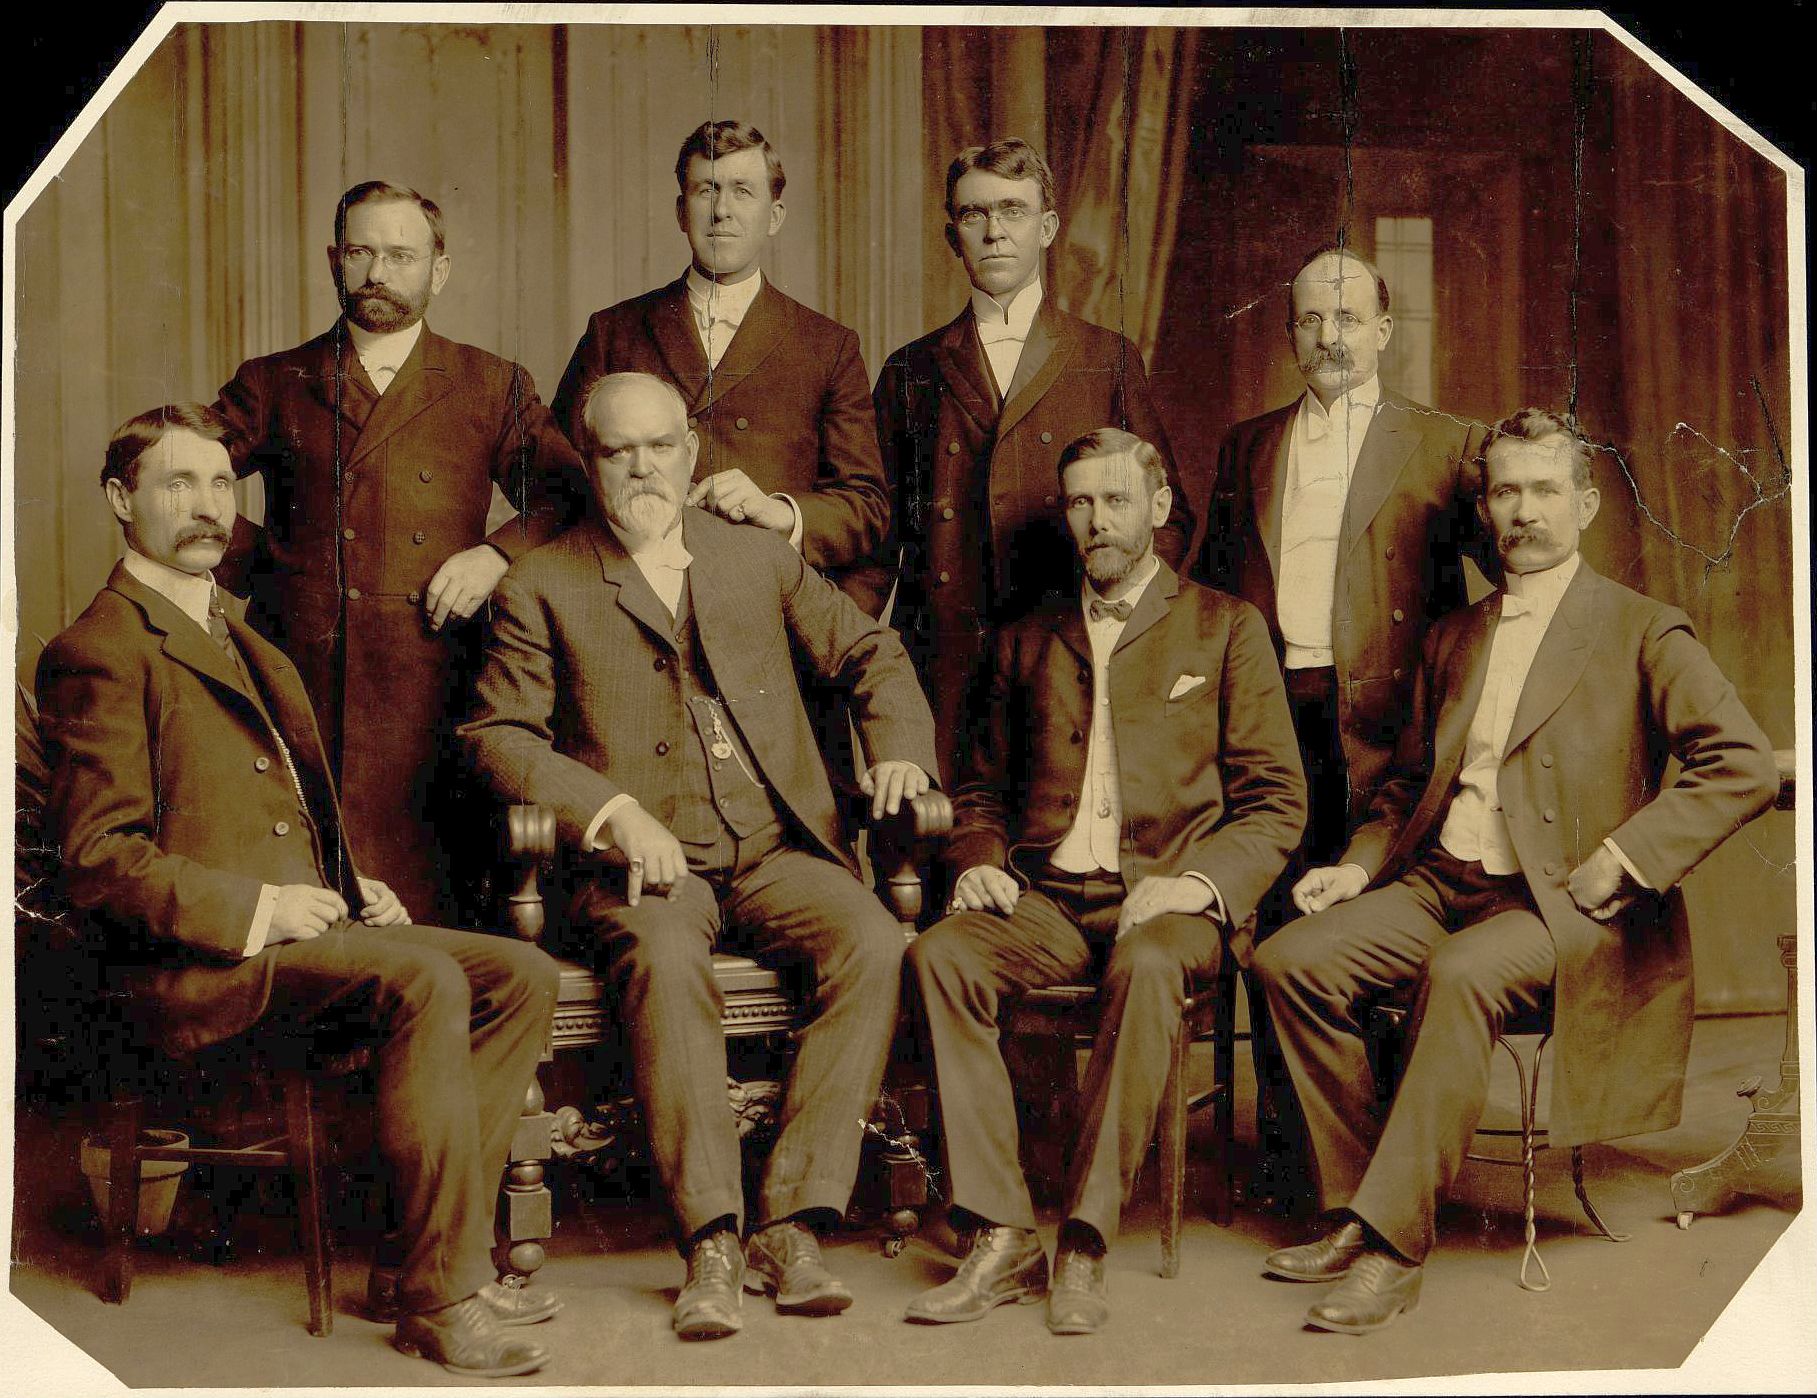 United States Mission Presidents